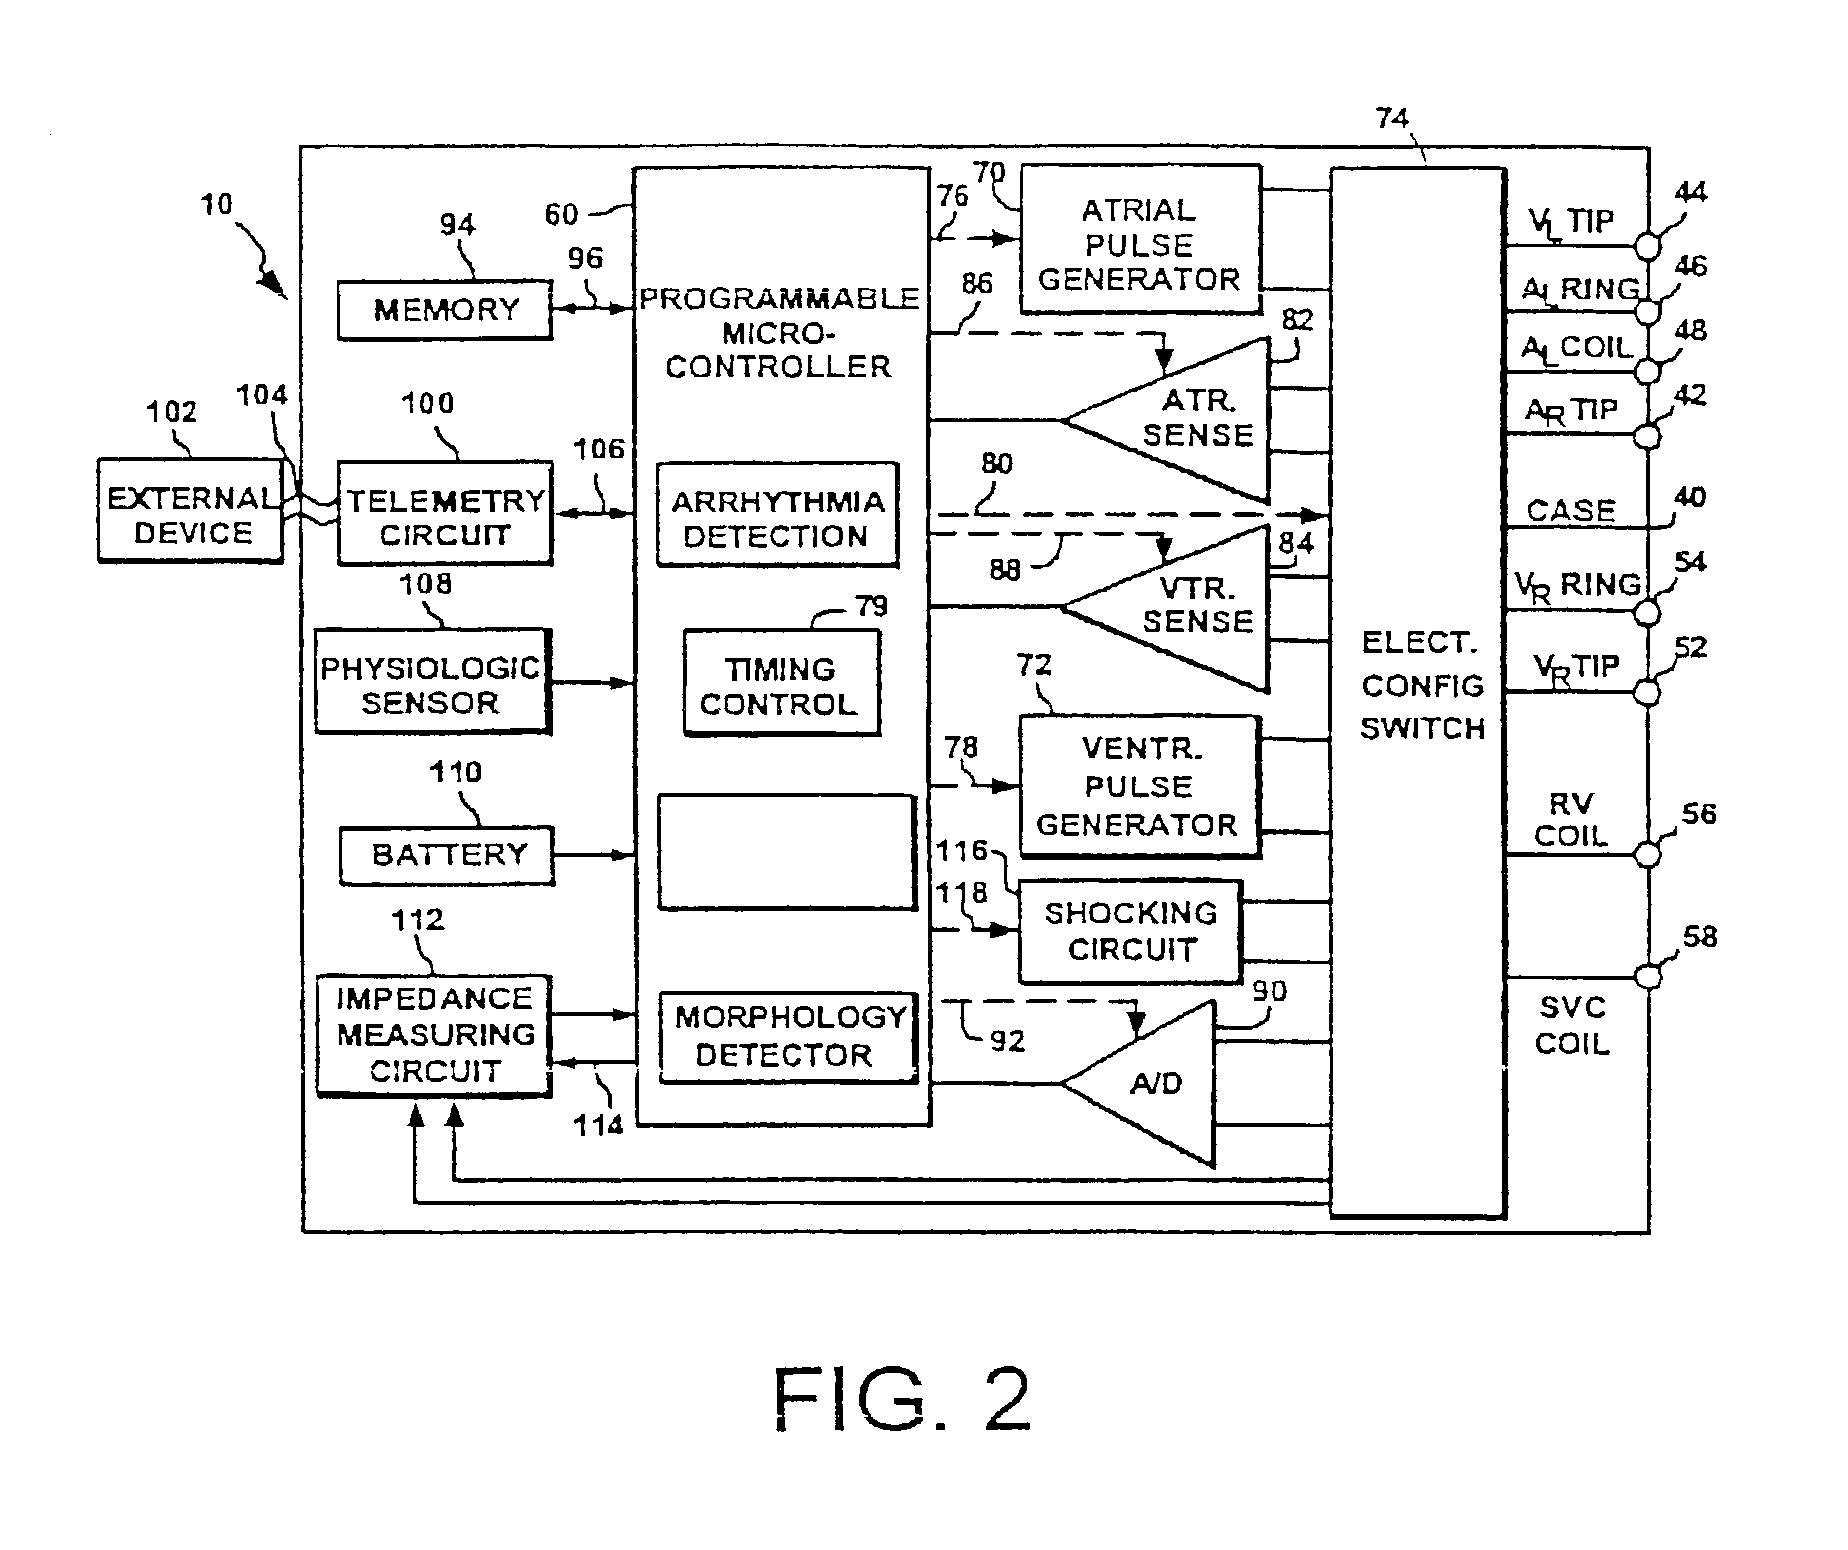 Stackable capacitor having opposed contacts for an implantable electronic medical device